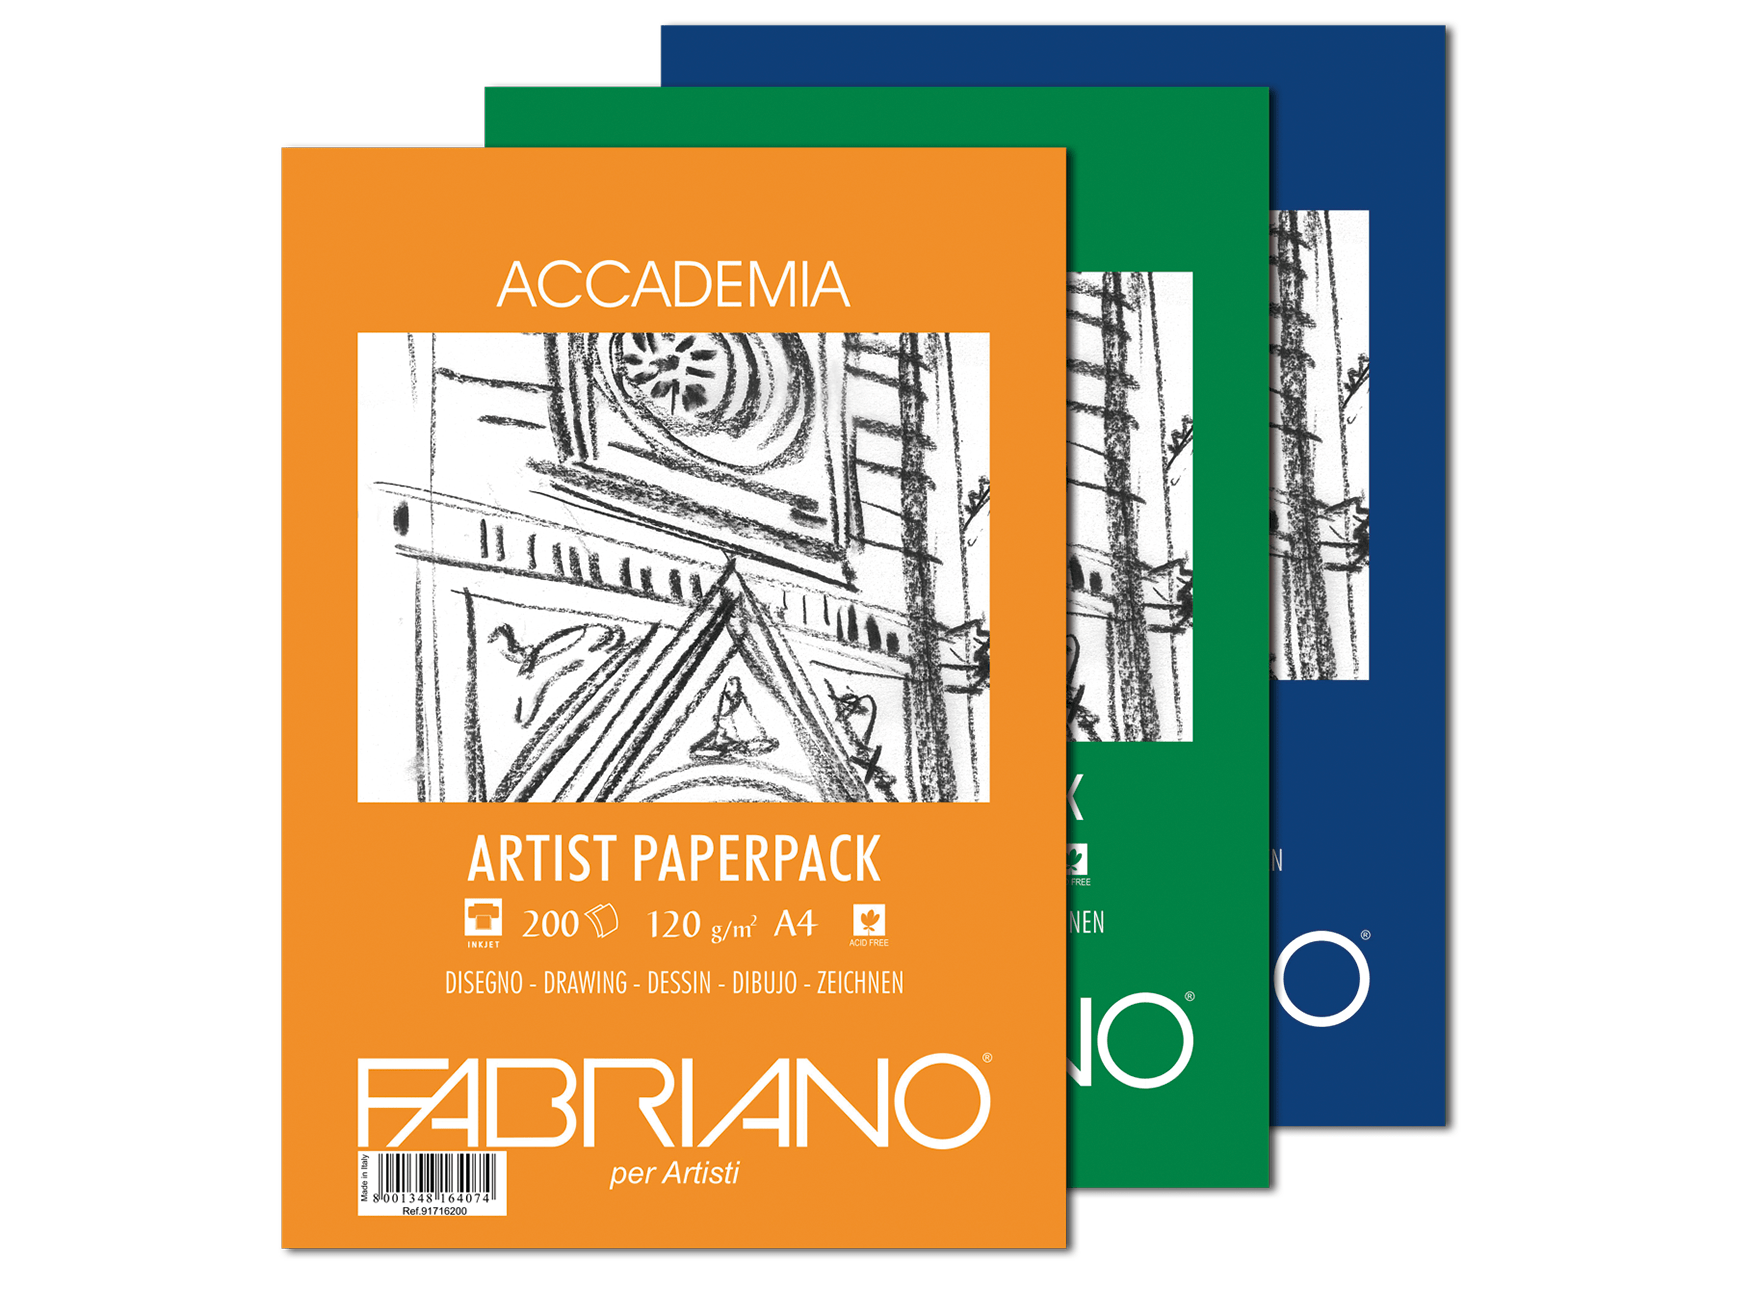 Fabriano Accademia Sketchbook 120gsm - Prime Art